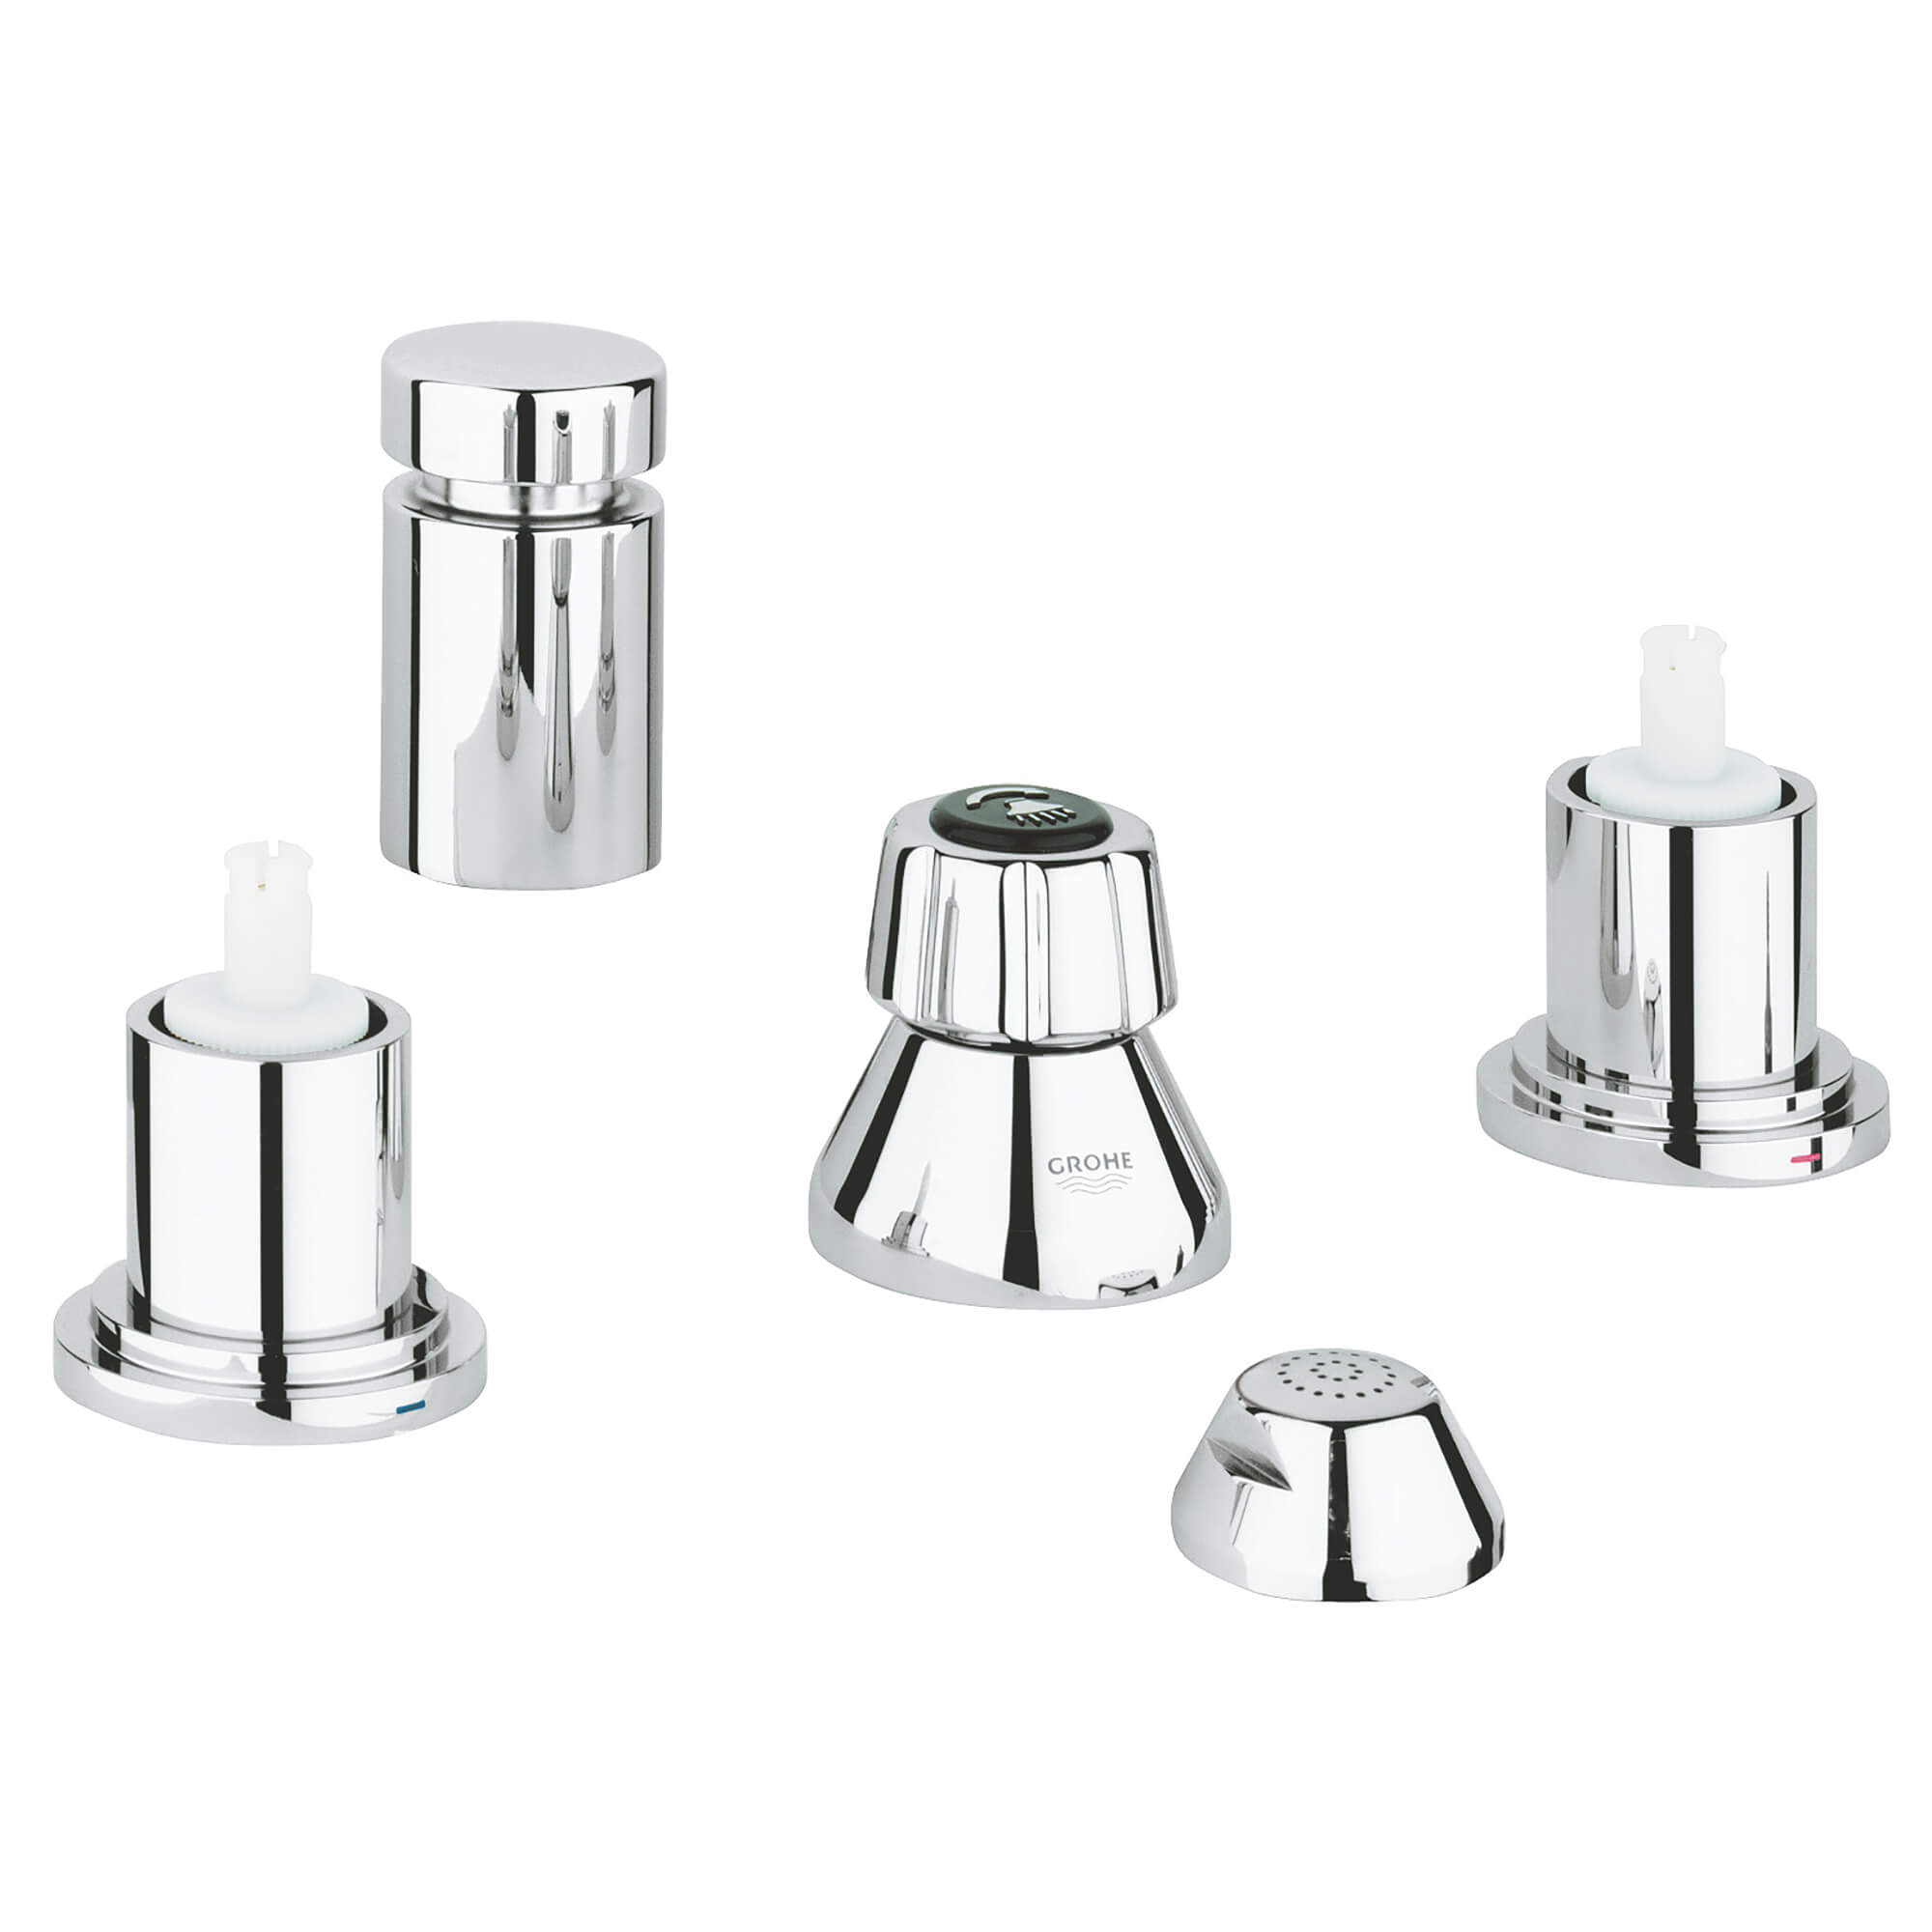 Batterie 3 trousTaille M GROHE CHROME